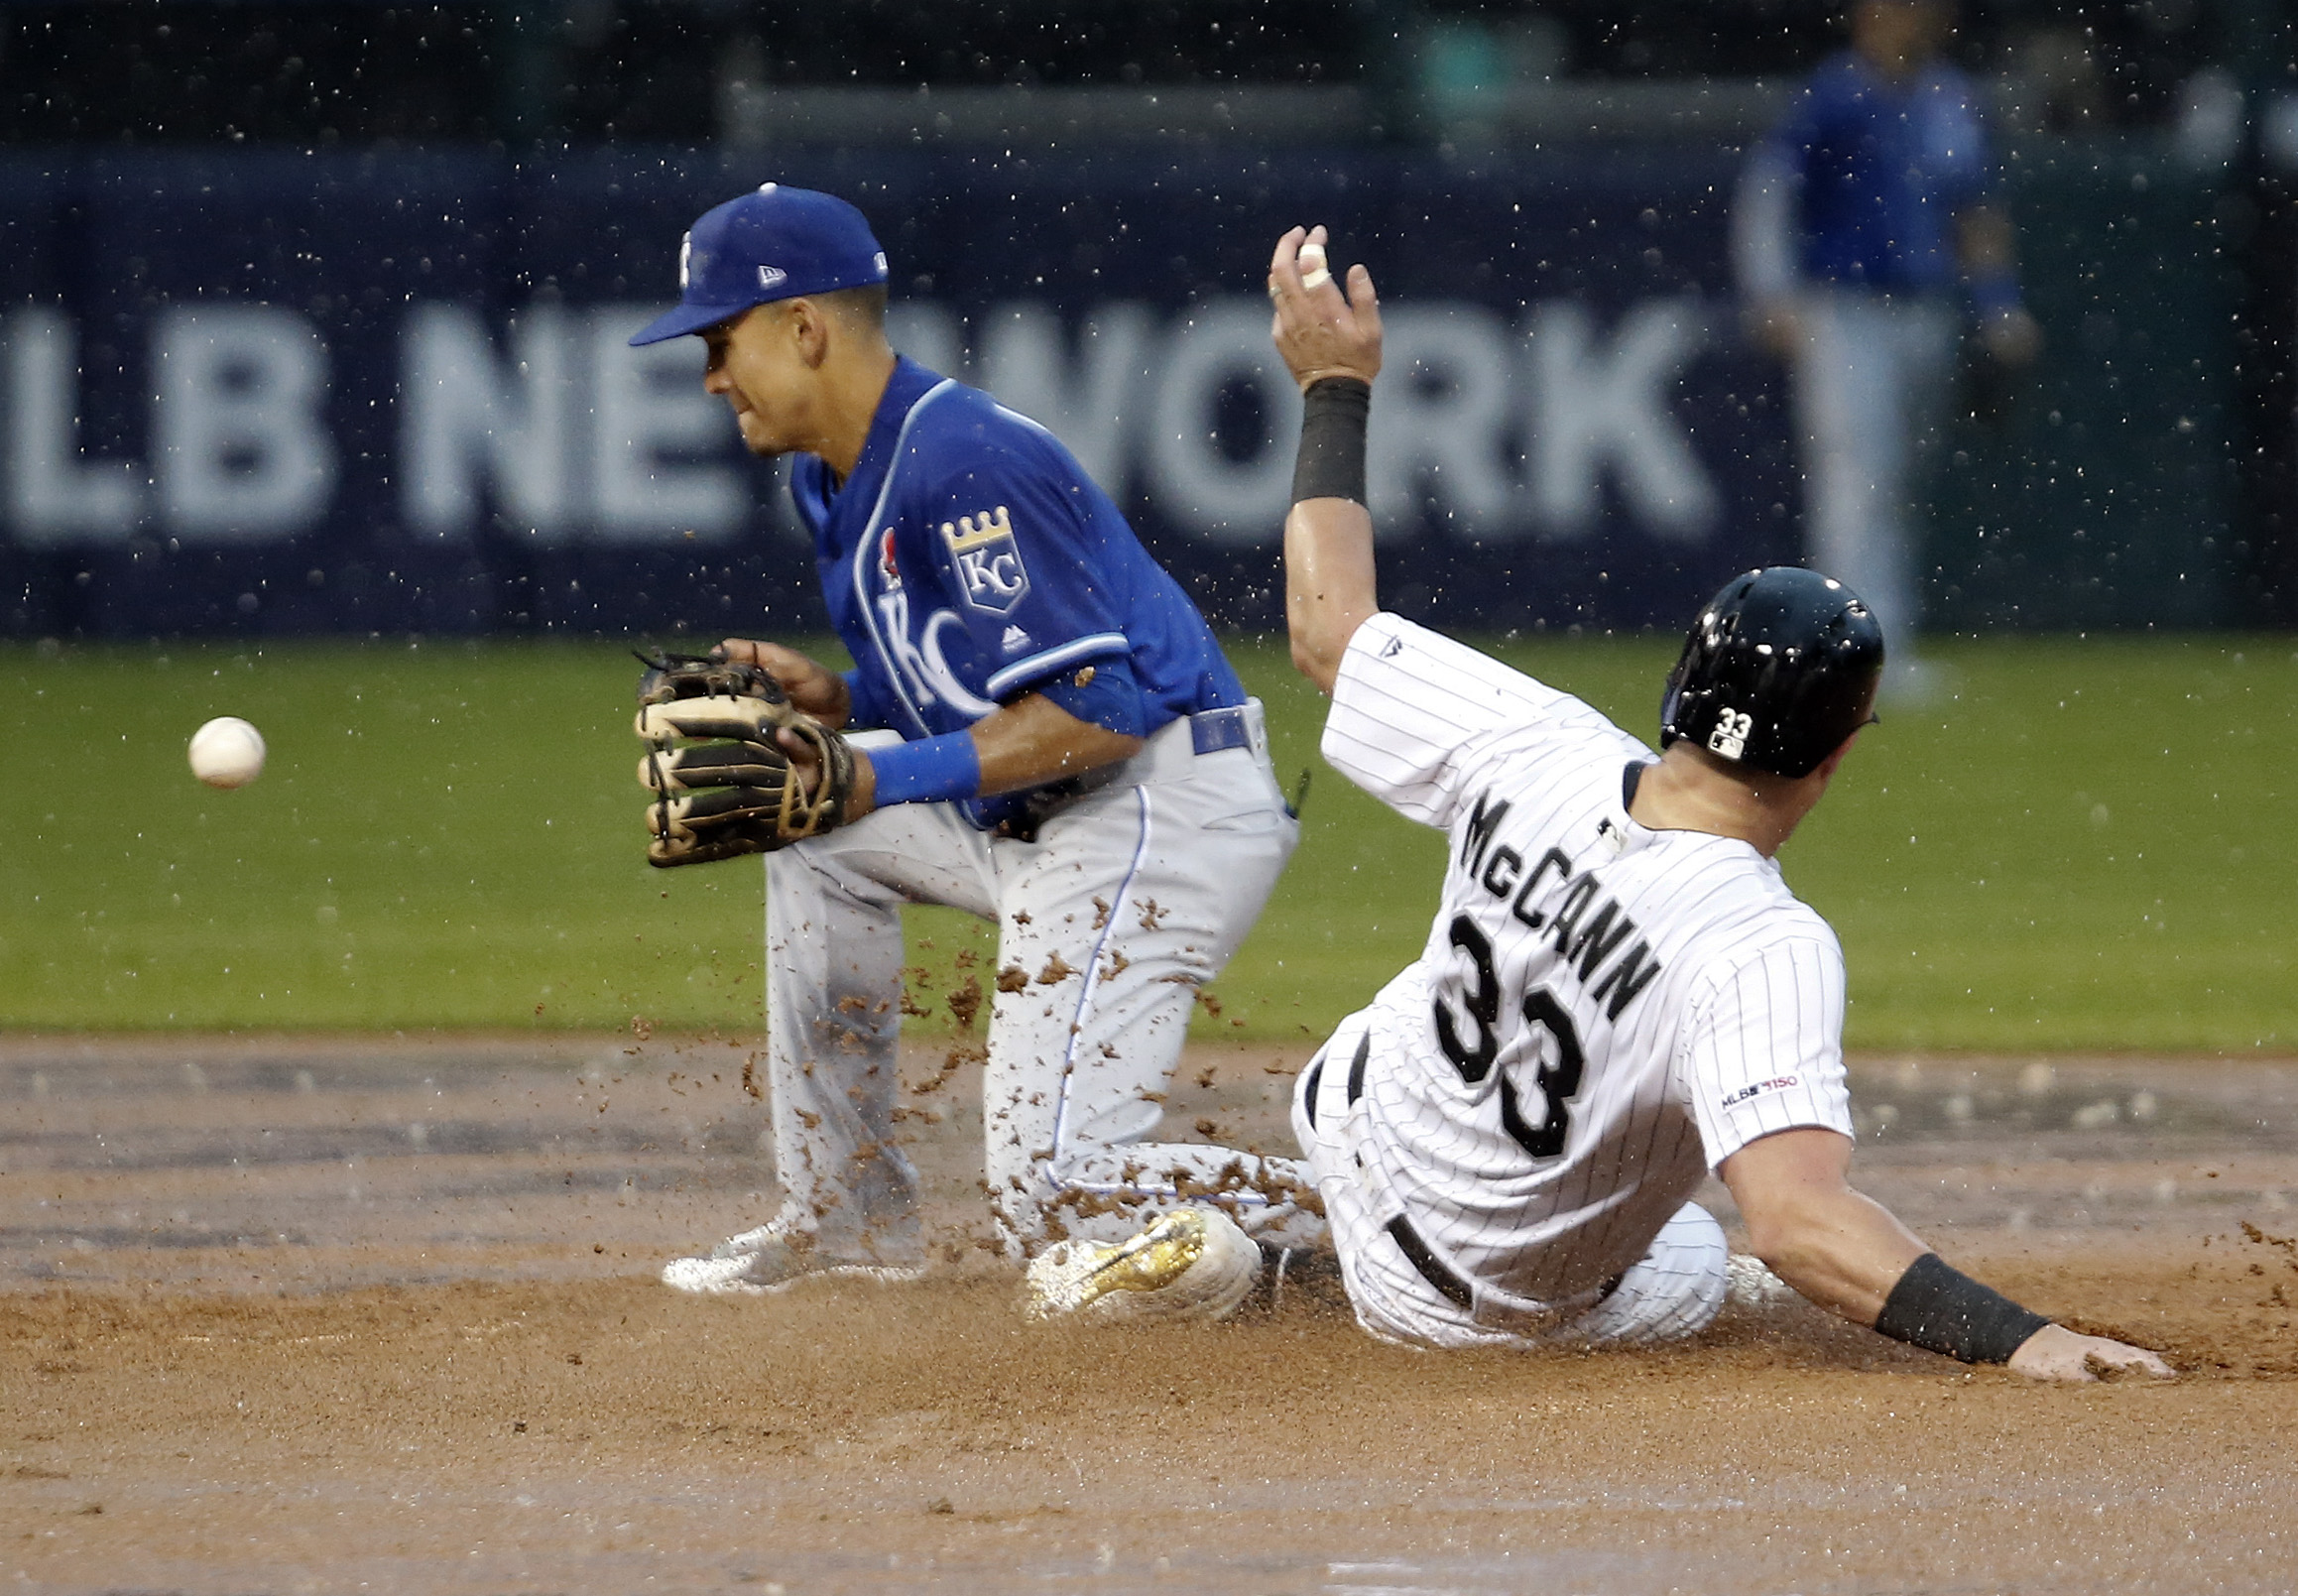 James McCann #33 of the Chicago White Sox goes to second while Nicky Lopez #1 of the Kansas City Royals catches the throw from third base during the fifth inning at Guaranteed Rate Field on May 27, 2019 in Chicago, Illinois.